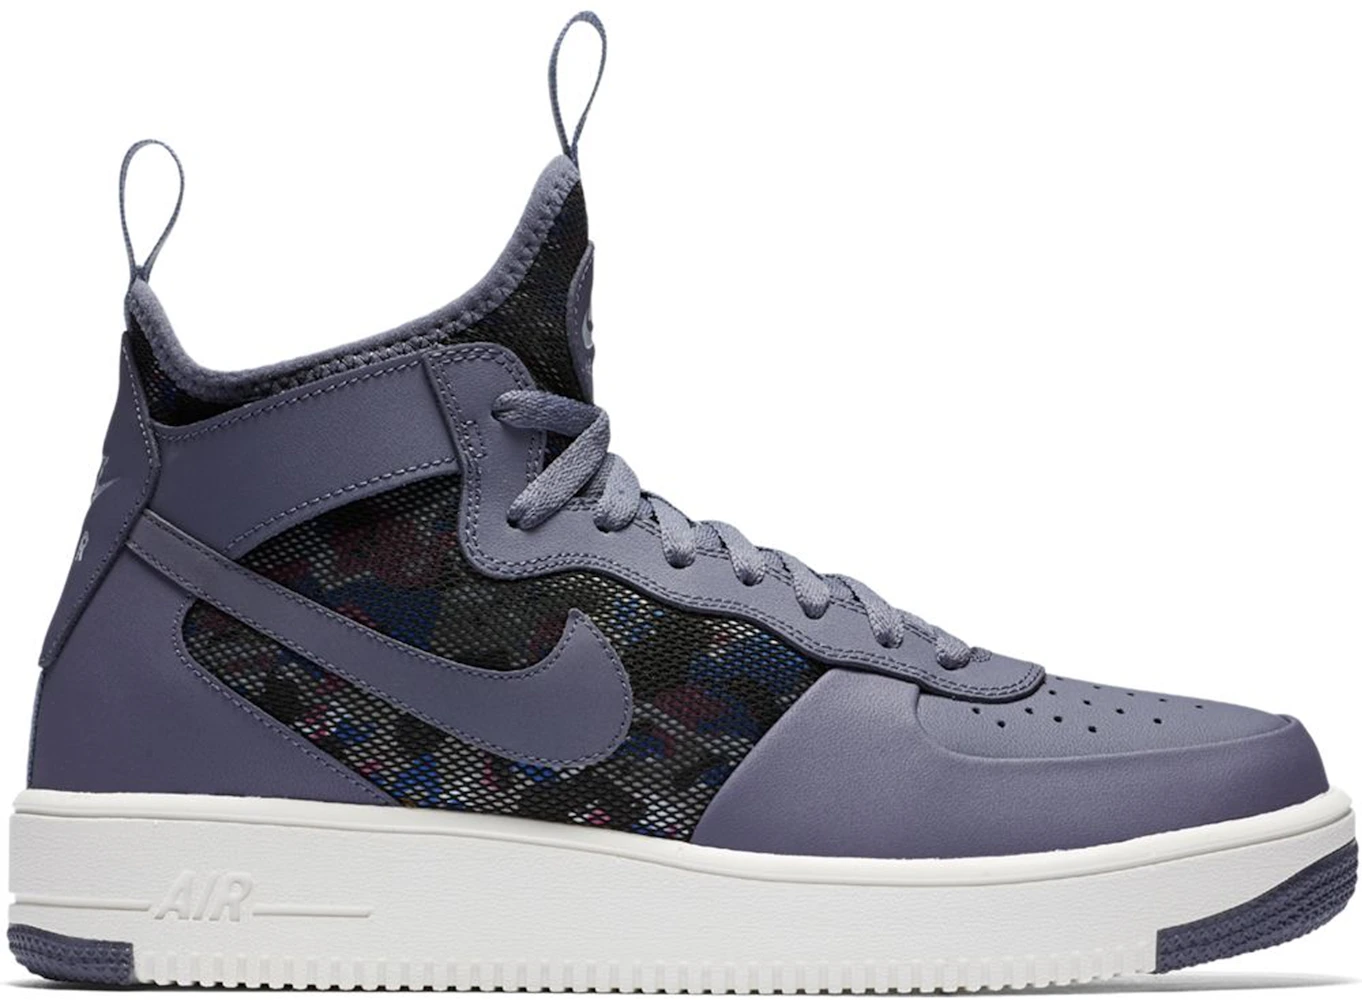 Nike Air Force 1 Ultraforce Mid Light Carbon - 864014-005 - US